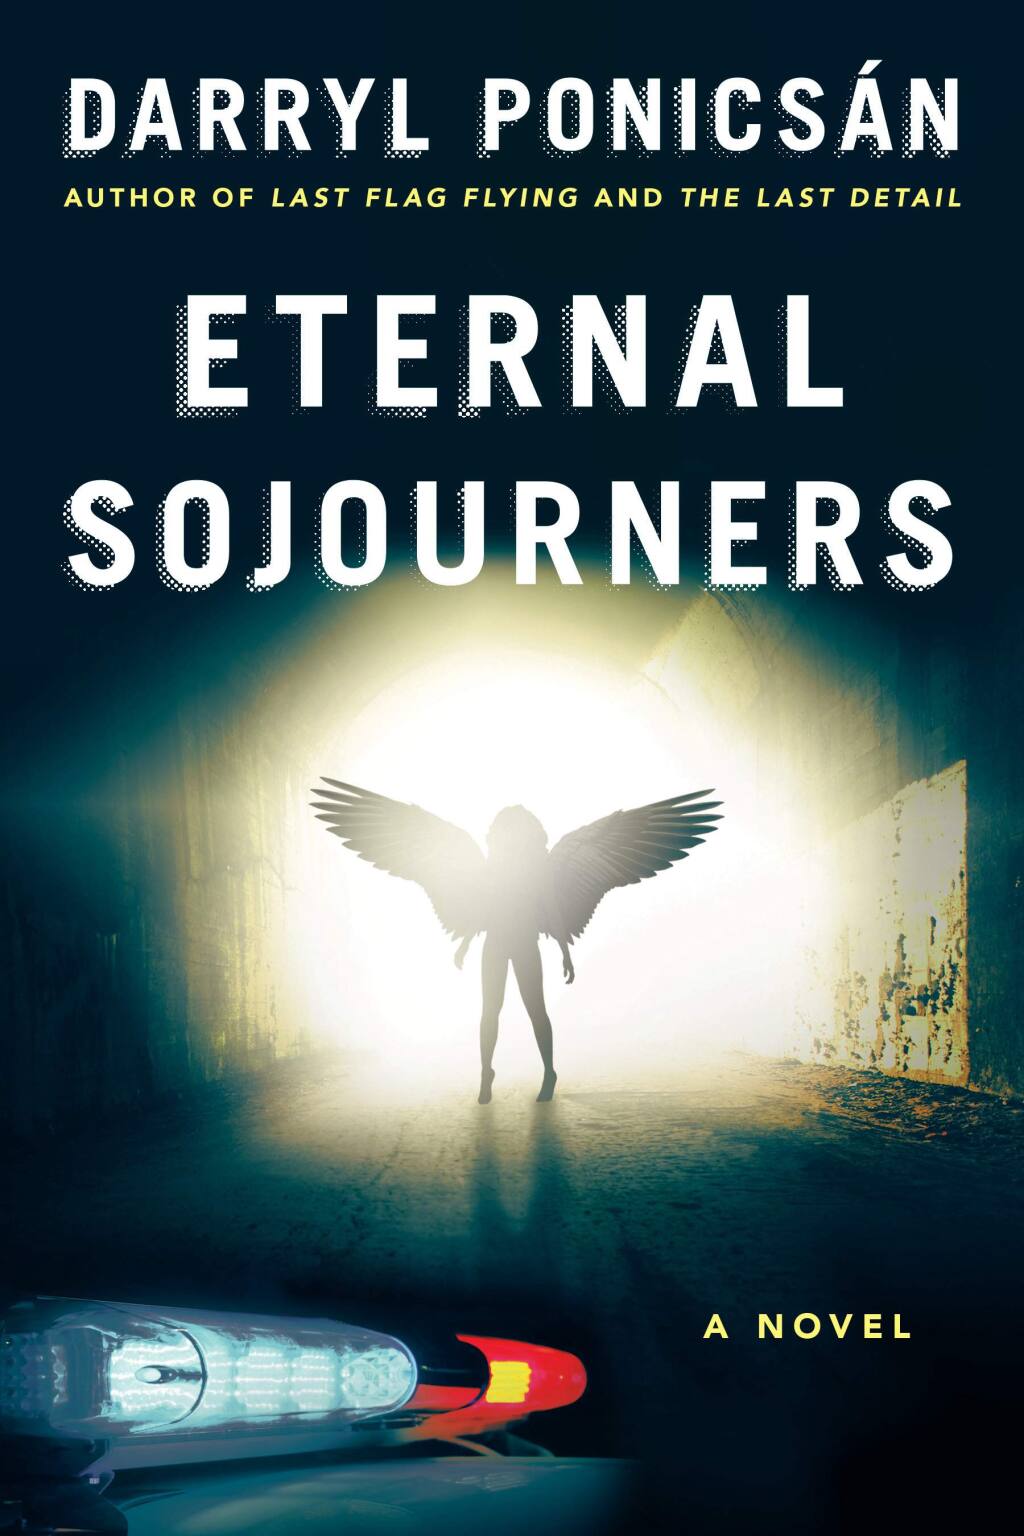 'Eternal Sojourners' by Darryl Ponicsan is a novel about a town some might think resembles Sonoma. Available in hardcover and as an e-book.